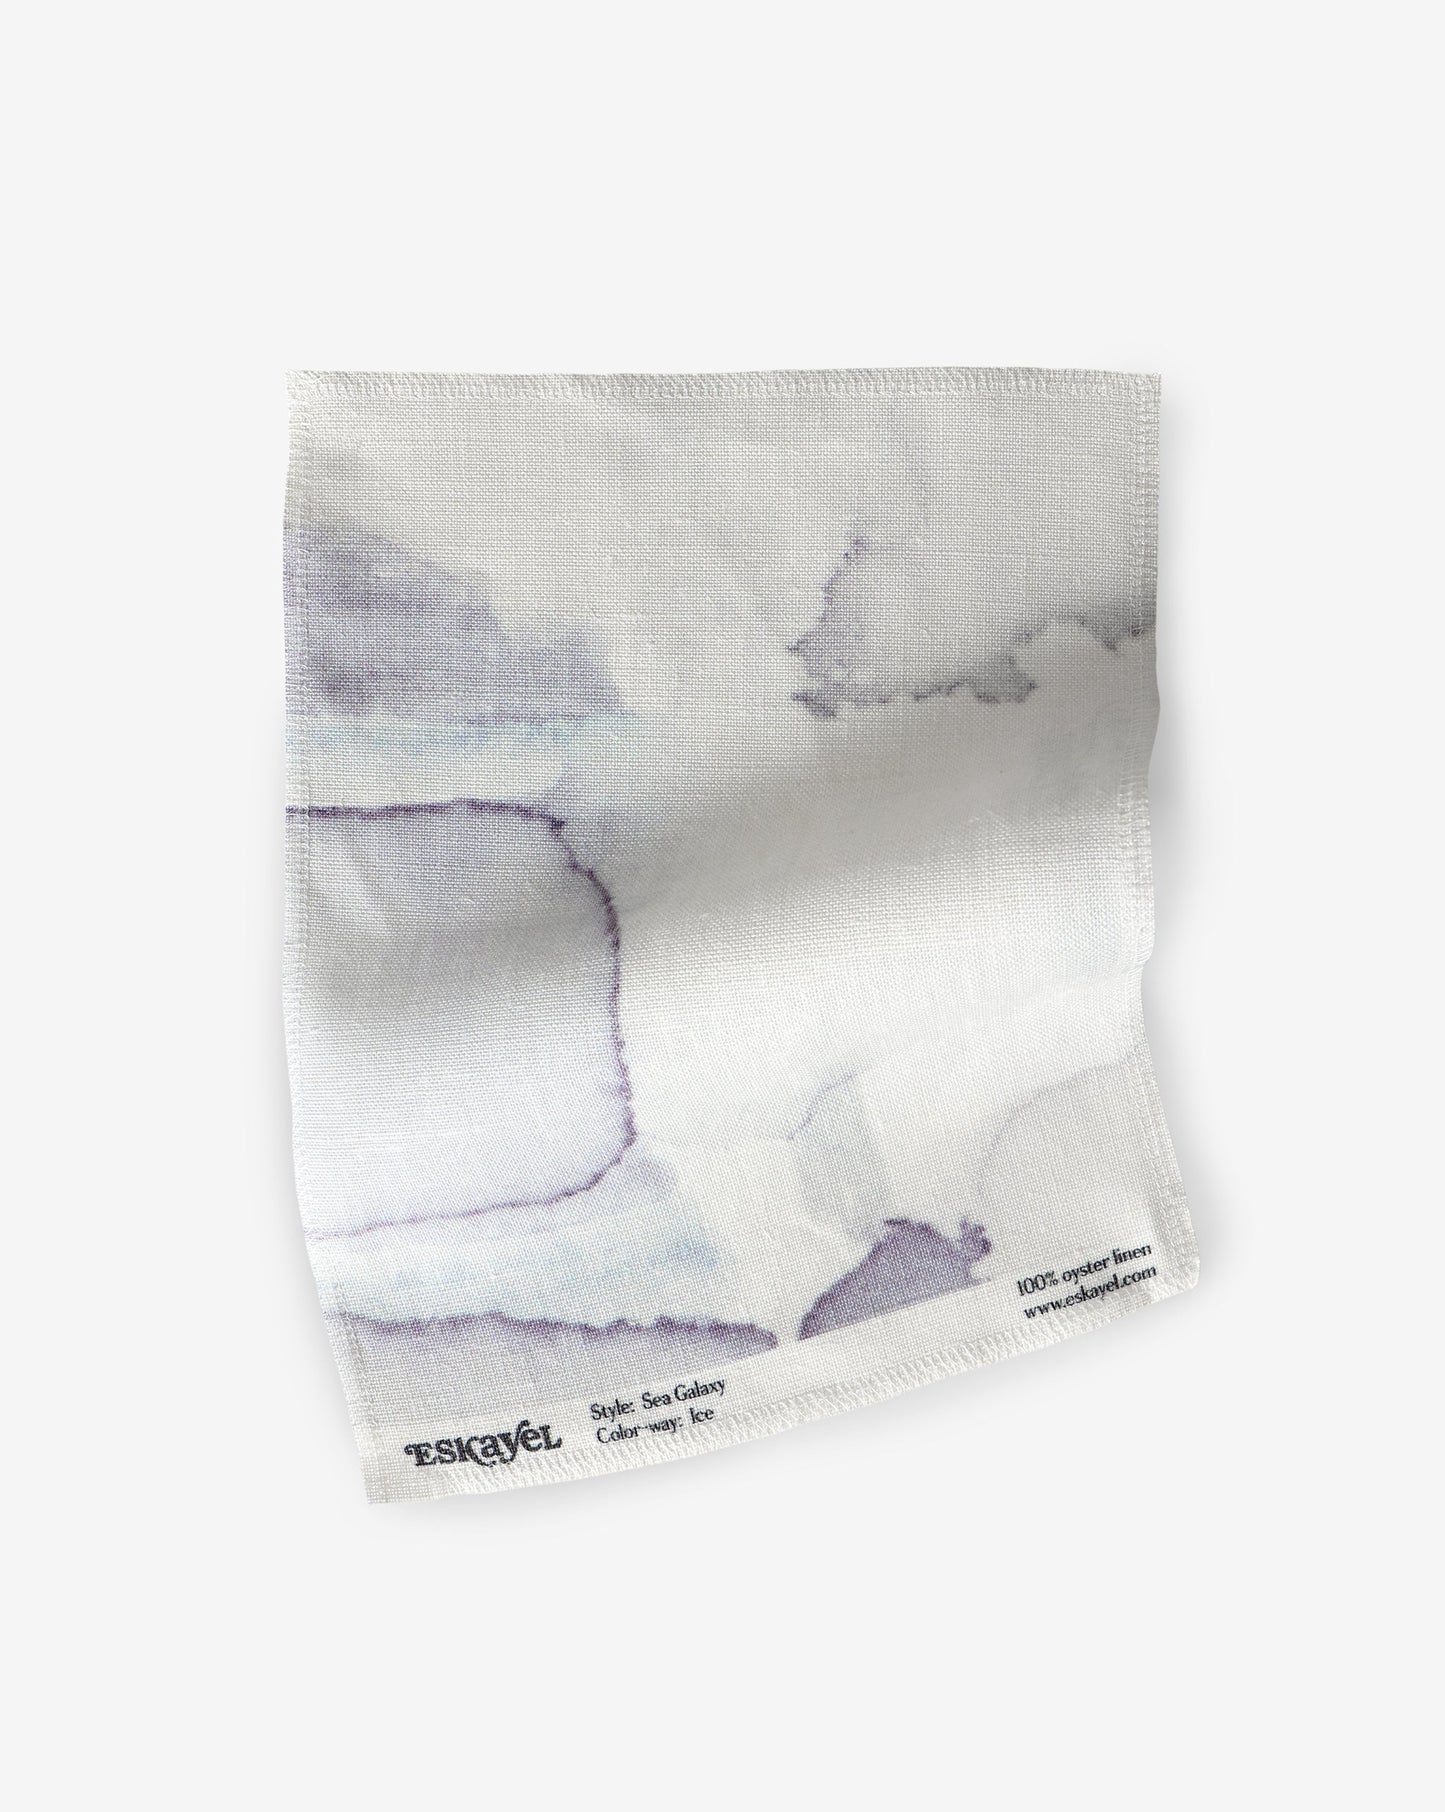 A purple and white design on a hand fabric featuring Sea Galaxy Fabric Ice drapes